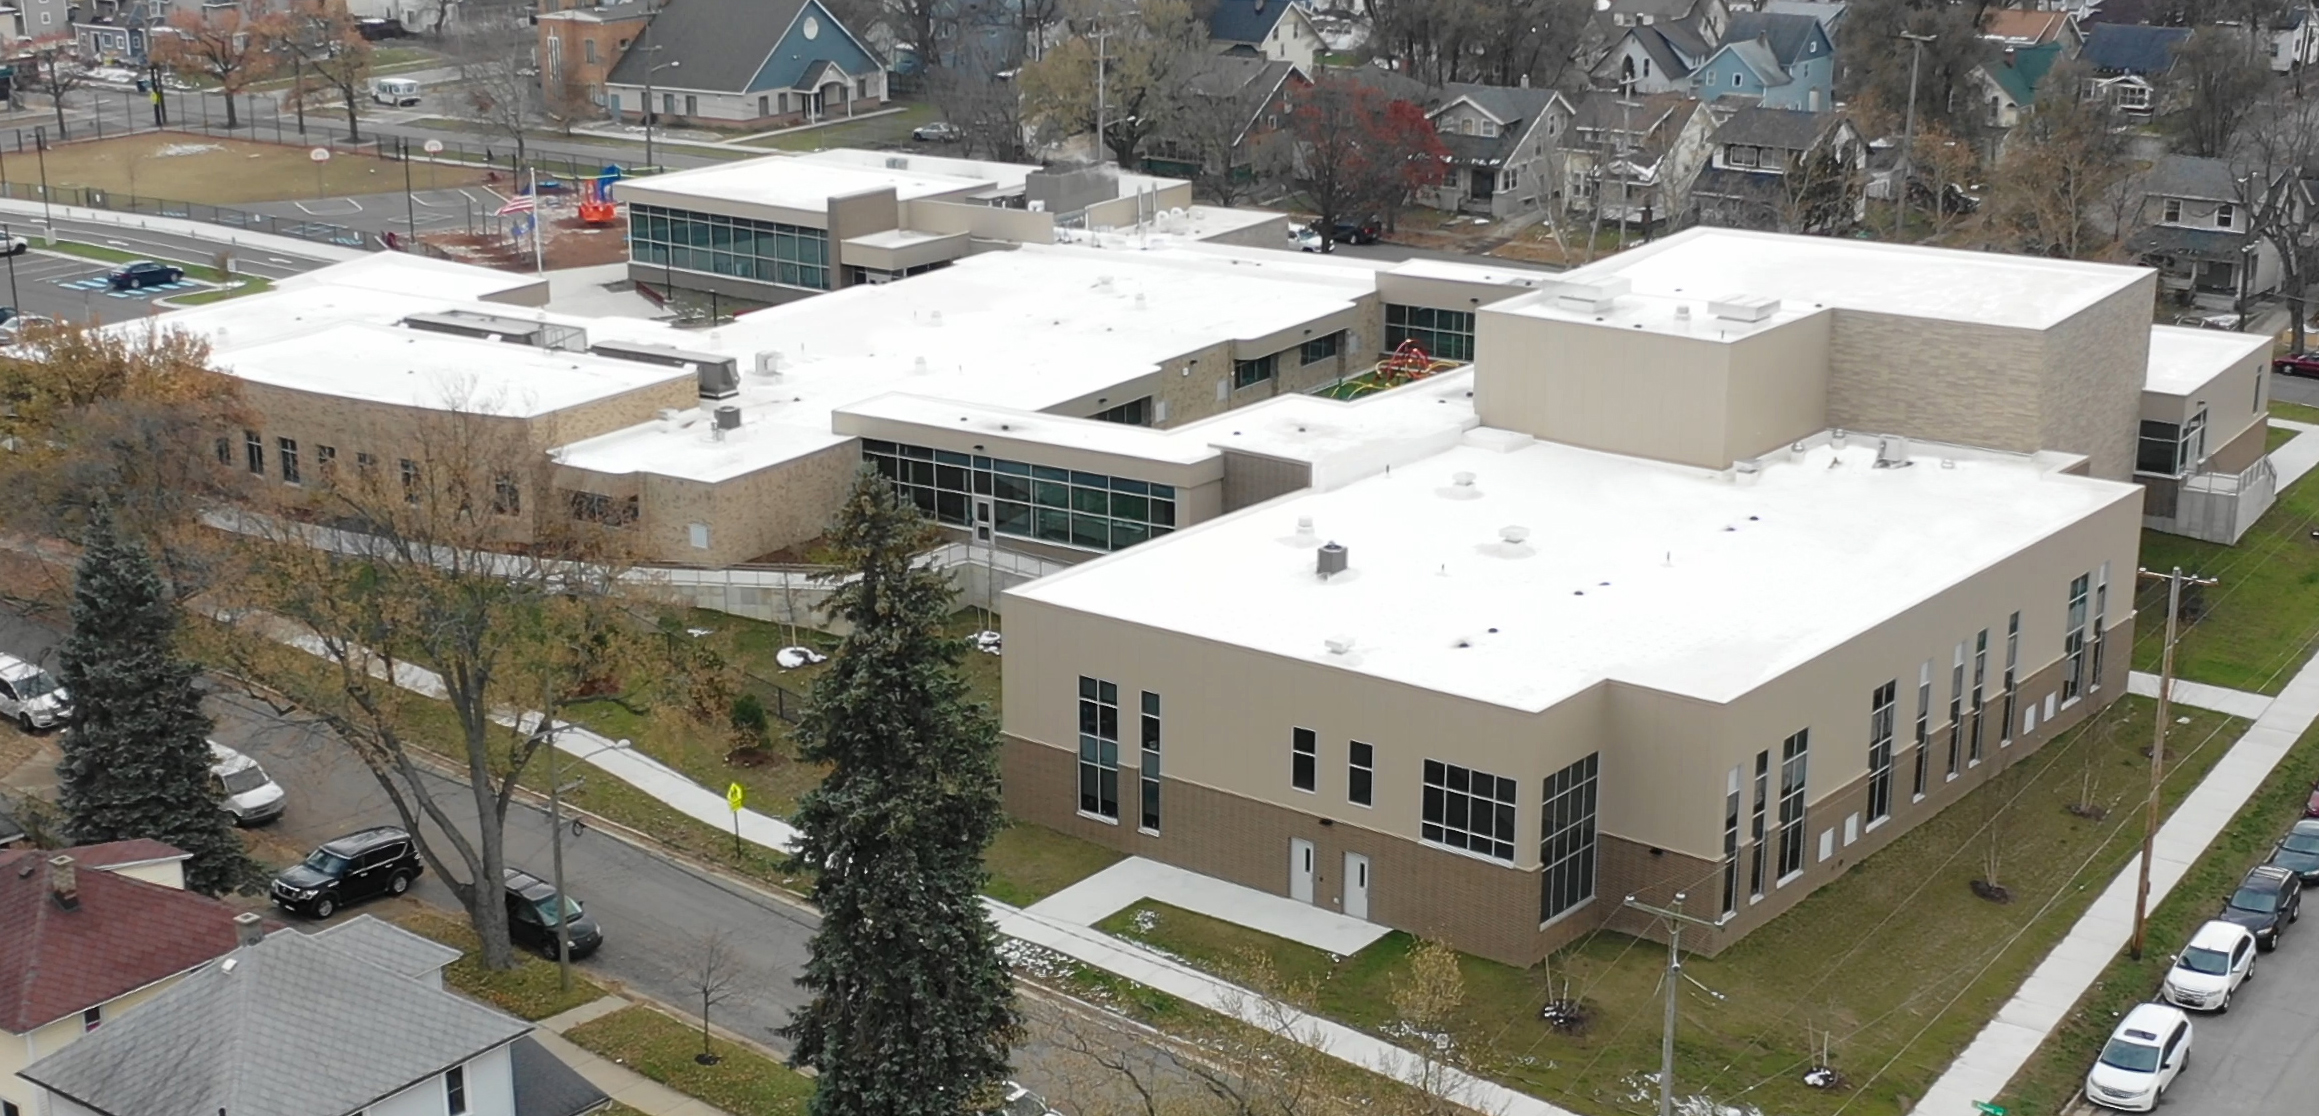 Studies show that cool roofing systems provide energy savings and other benefits when installed in cold climates. This cool roof was installed on West Shore Elementary School in Fenton, Michigan.